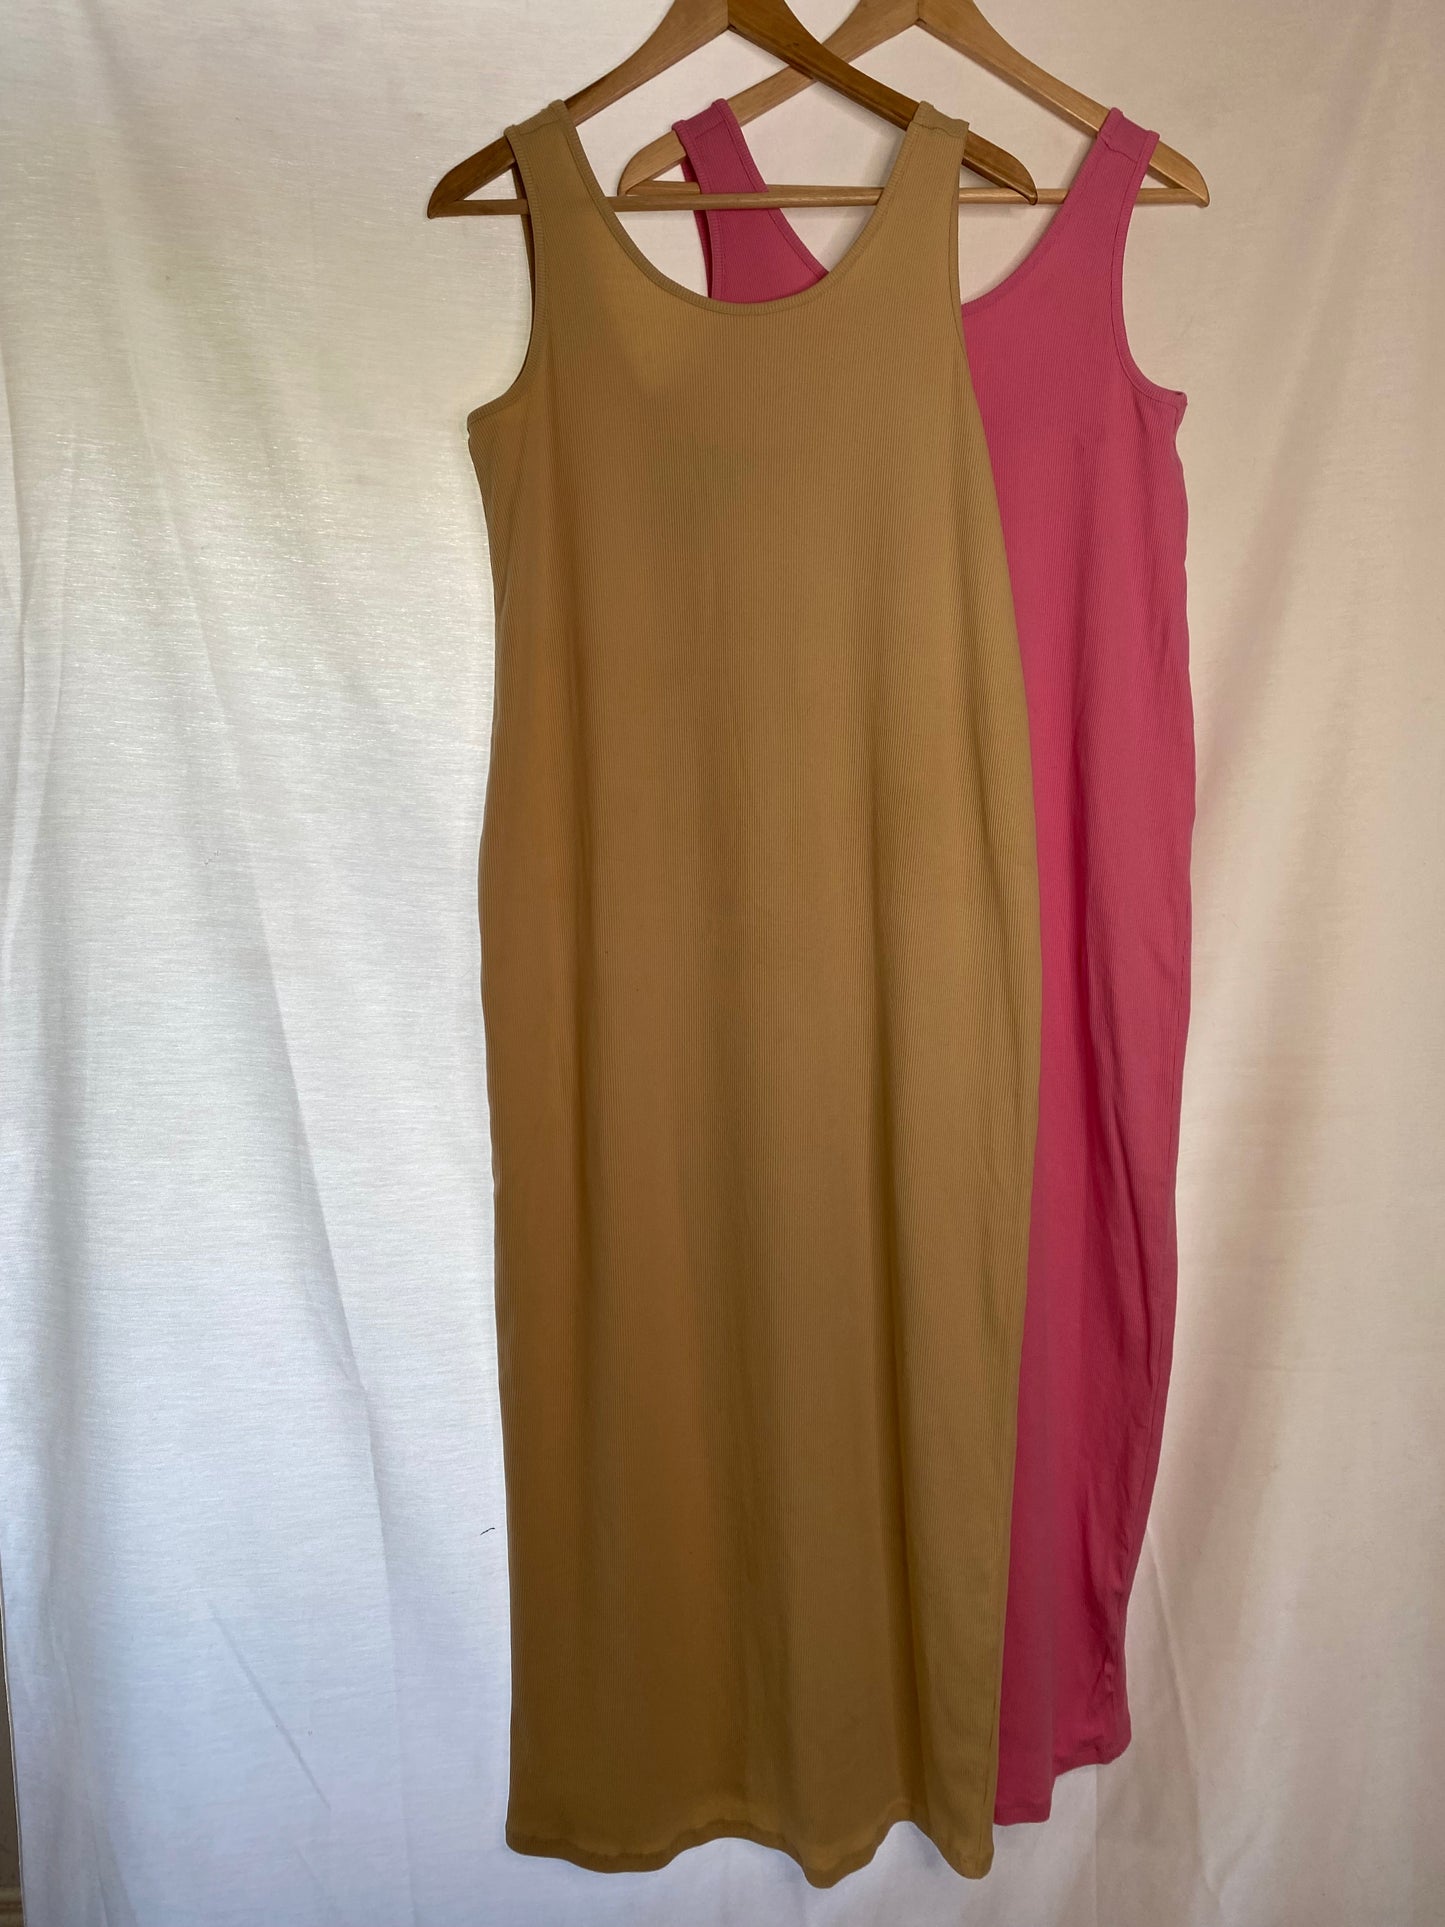 New look maternity - M 10 - 2 piece pink beige long ribbed sleeveless dress